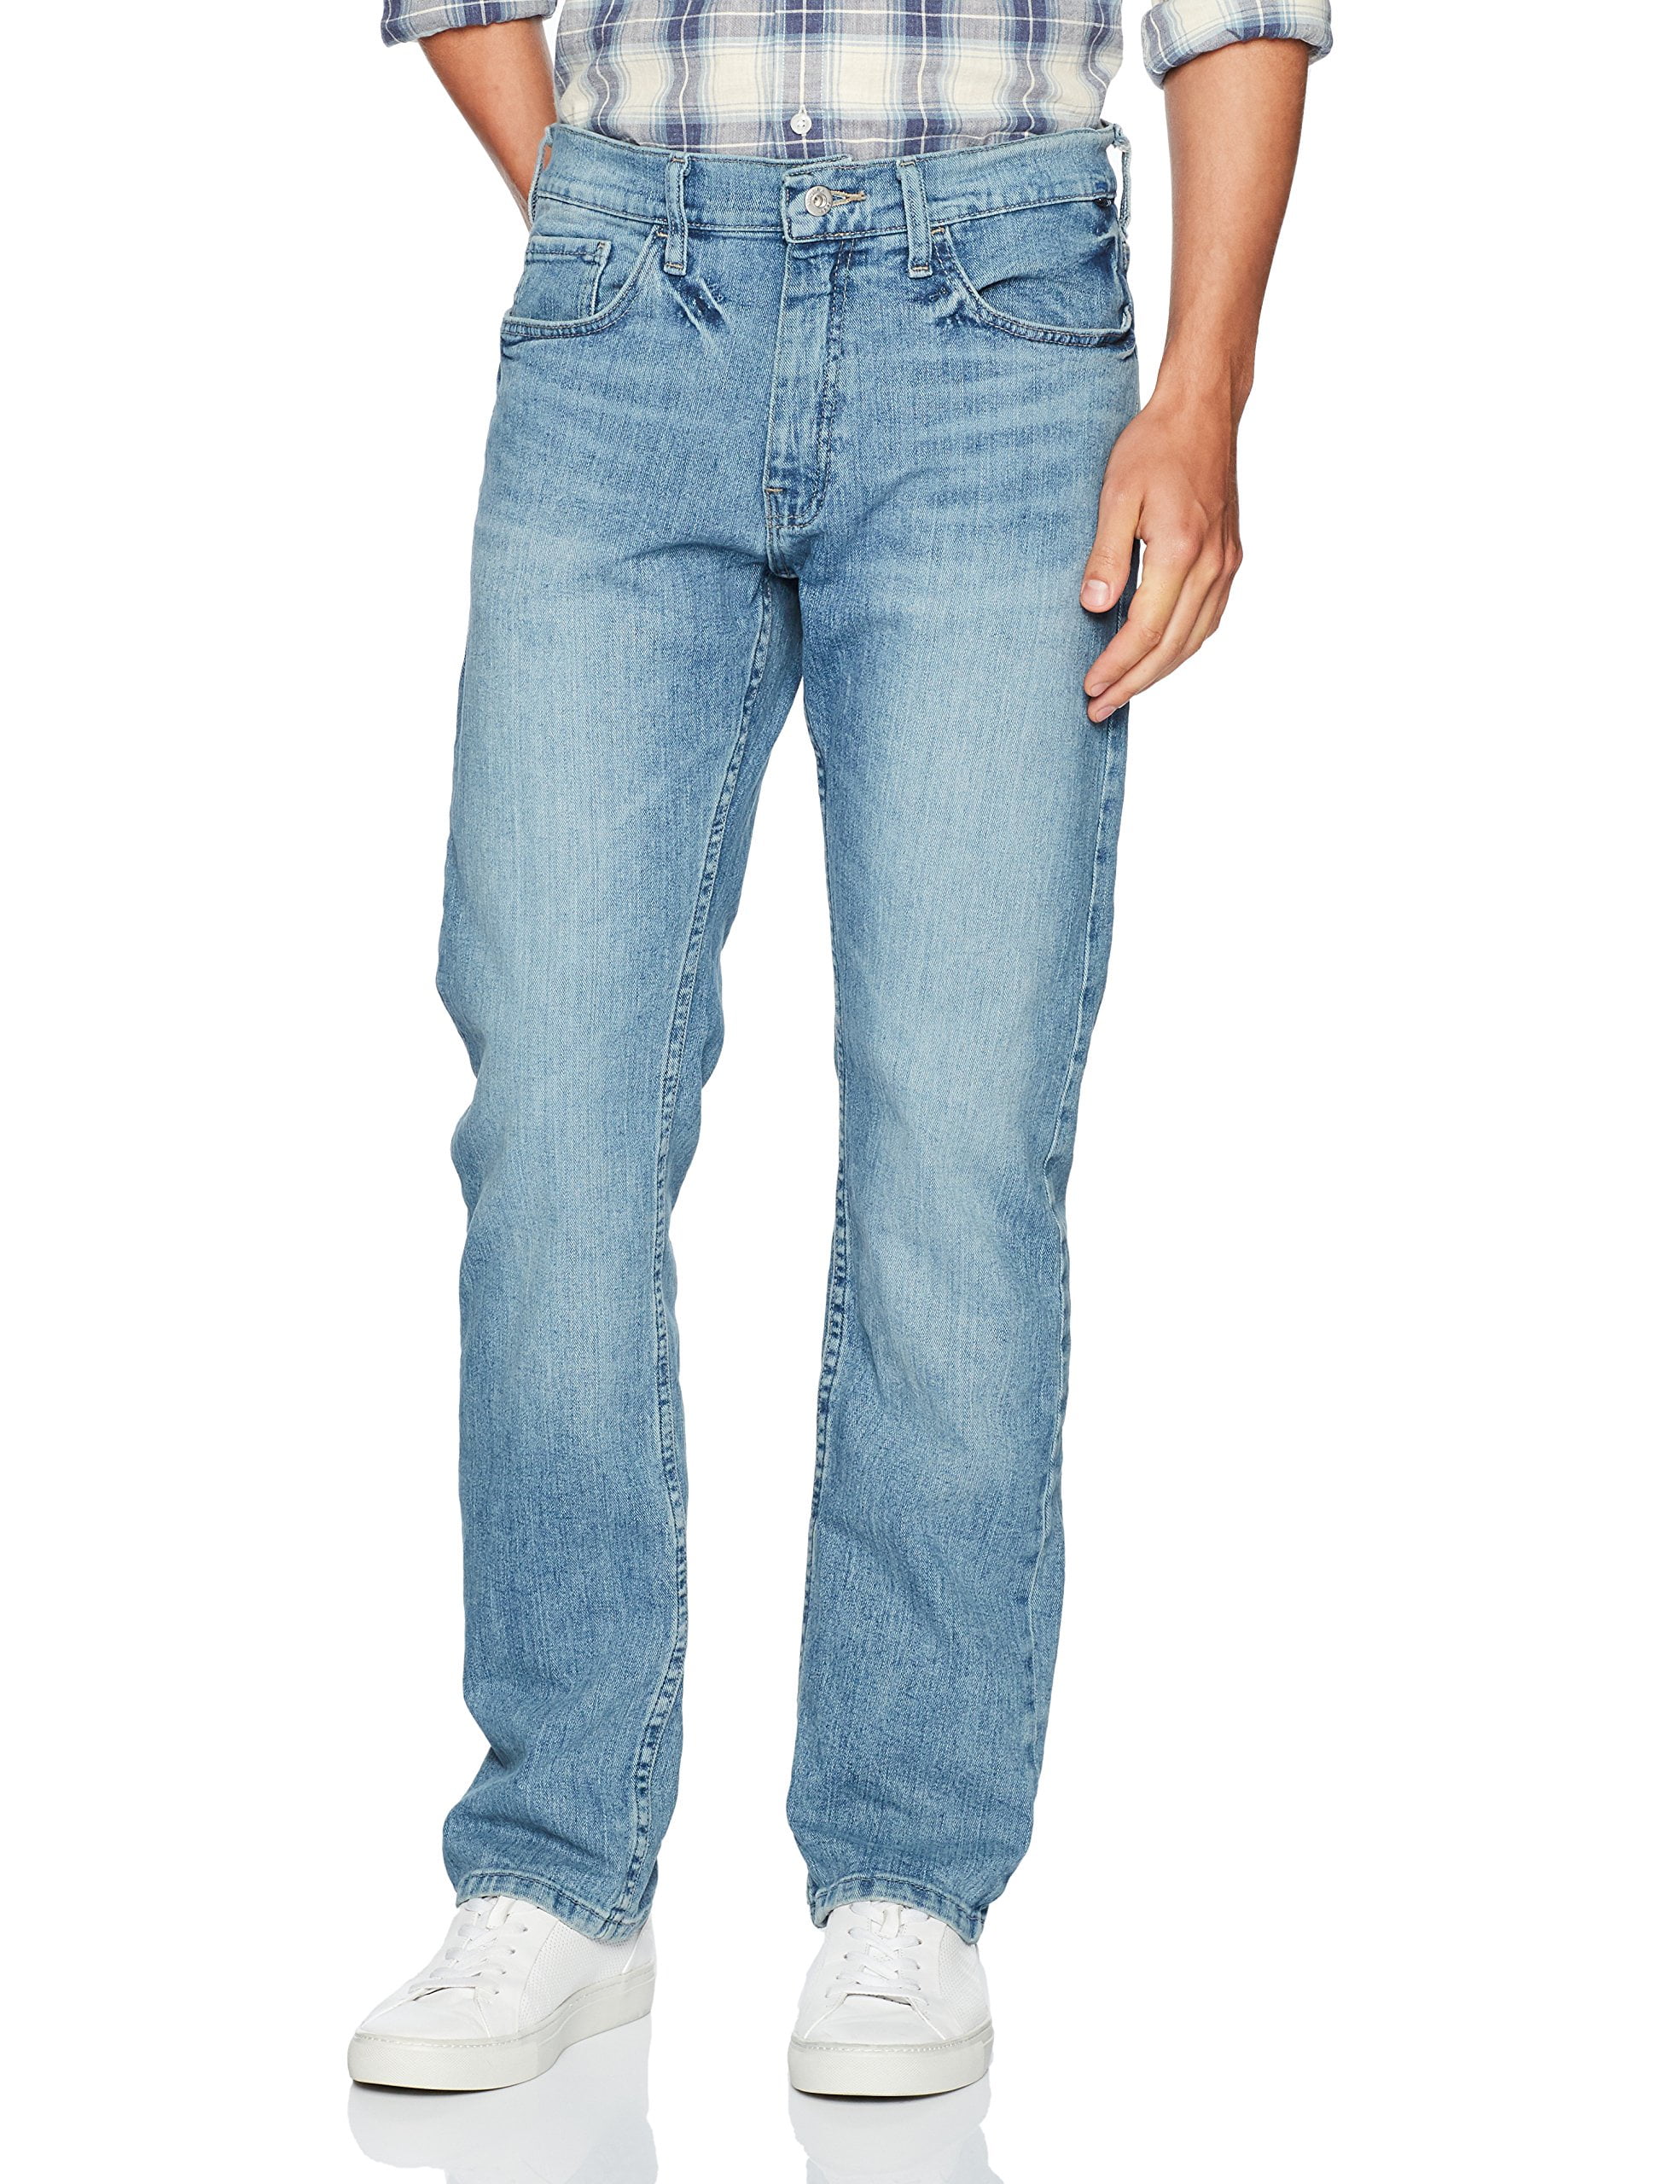 Nautica Jeans - Mens Jeans 40x32 Relaxed-Fit Straight-Leg Stretch 40 ...